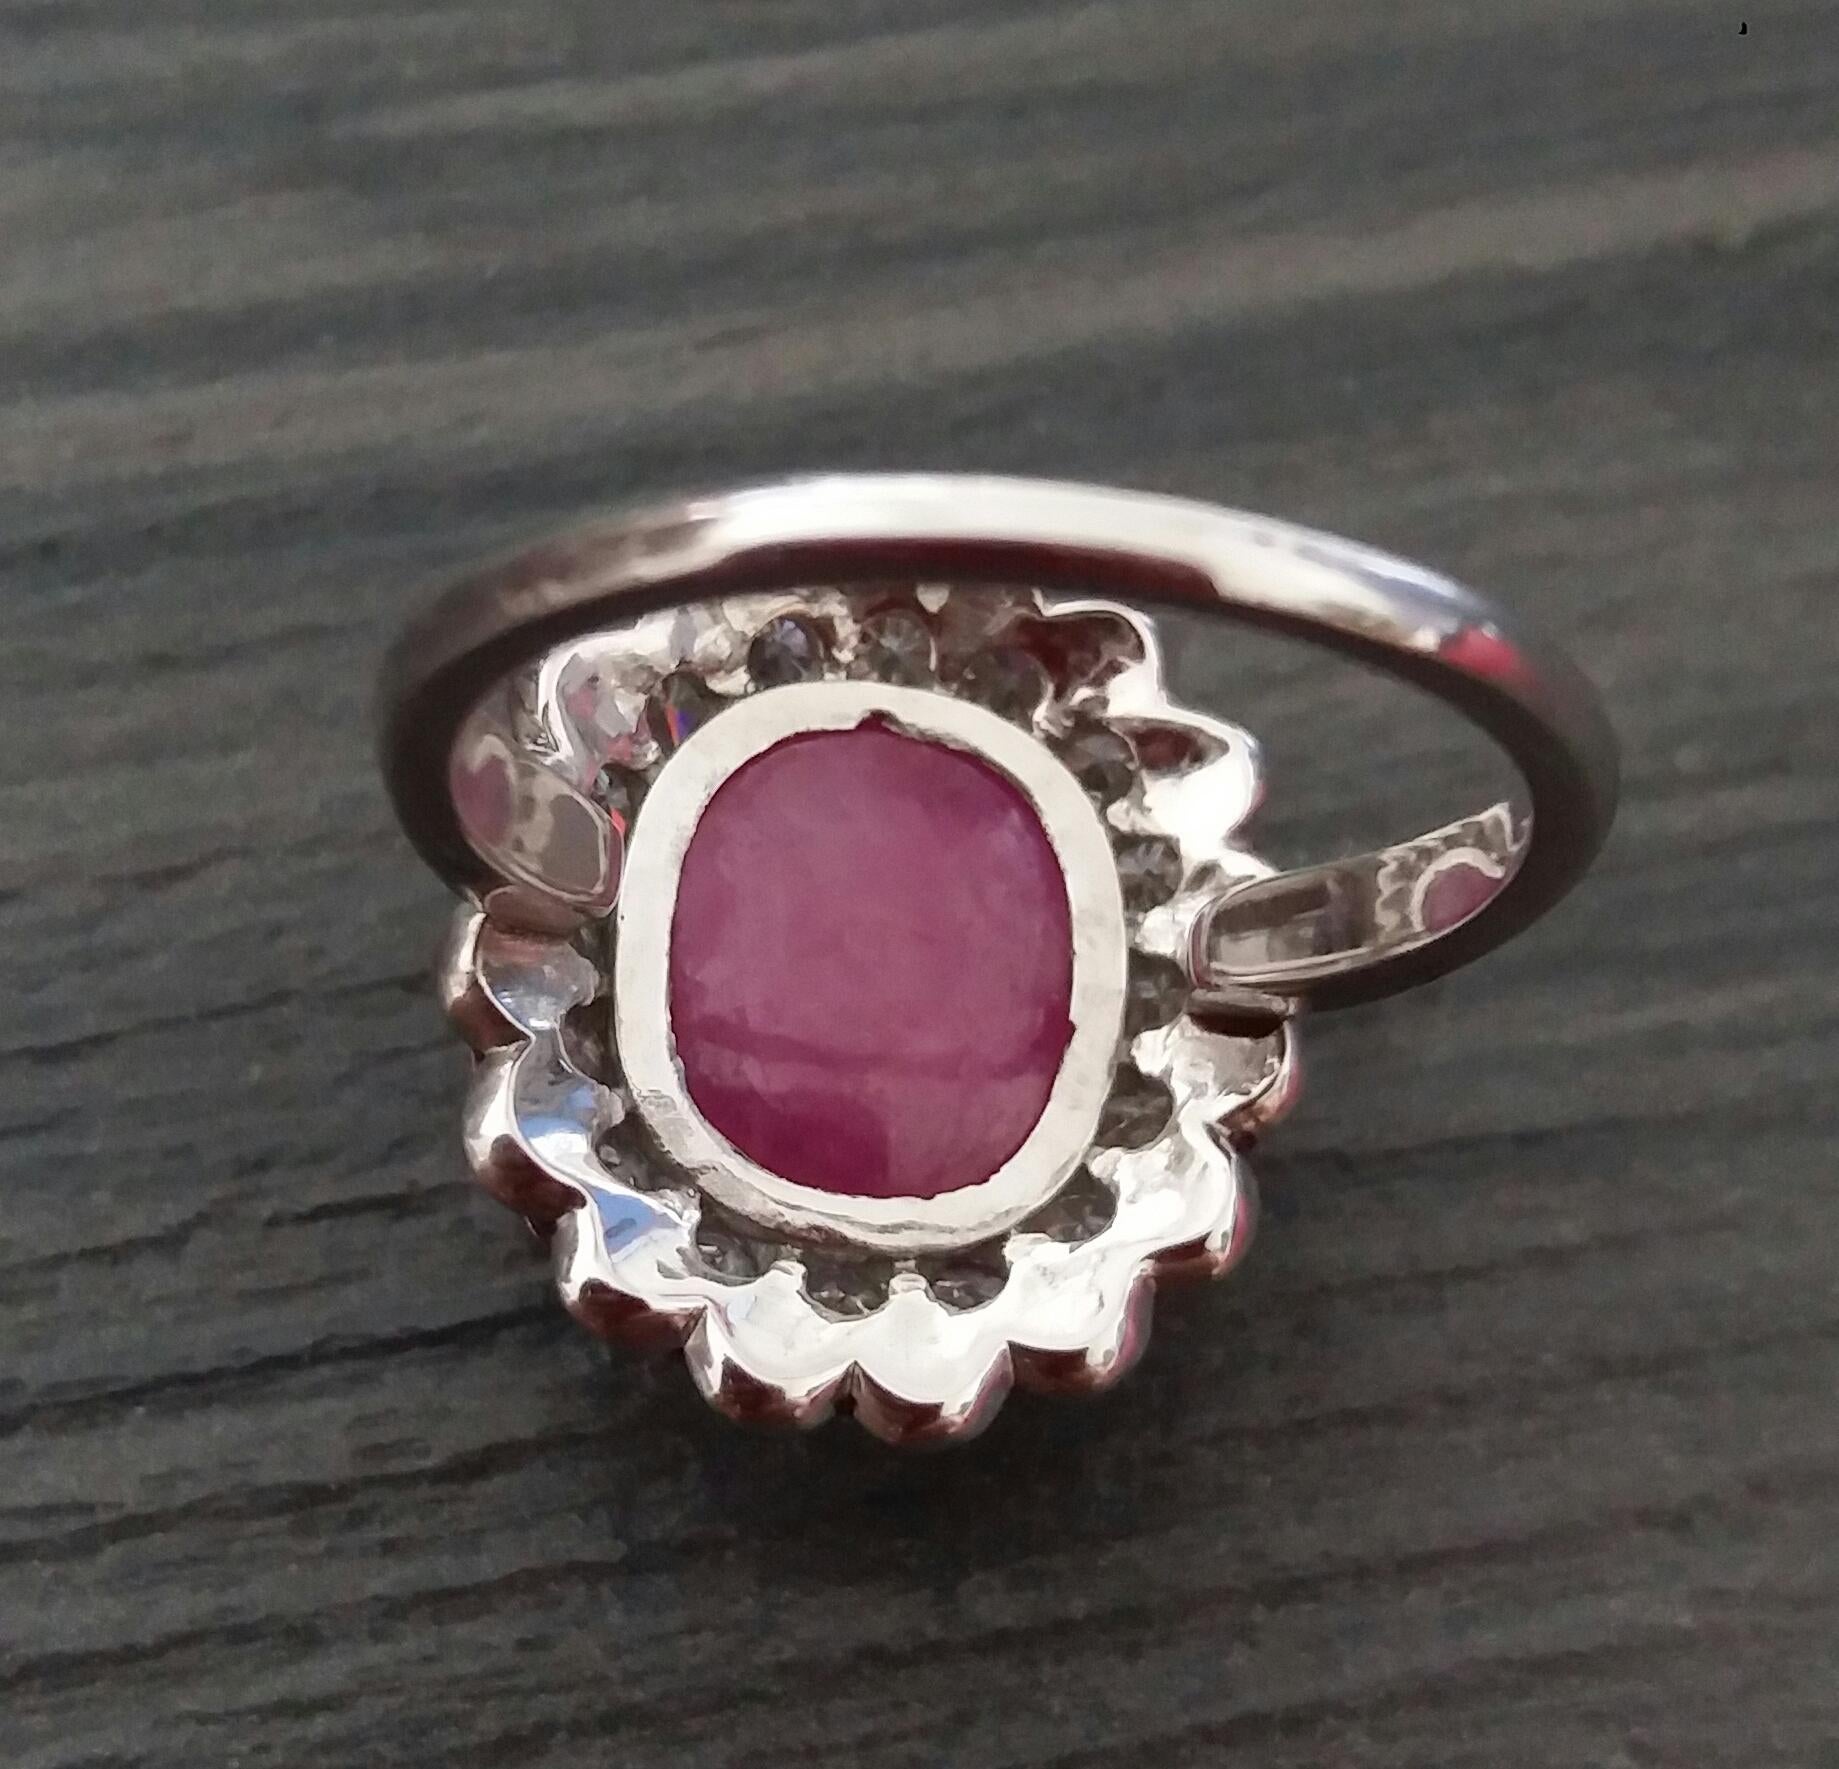 10 Carat Oval Ruby Cab 1 Carat Diamonds Red Enamel 14K White Gold Cocktail Ring For Sale 8